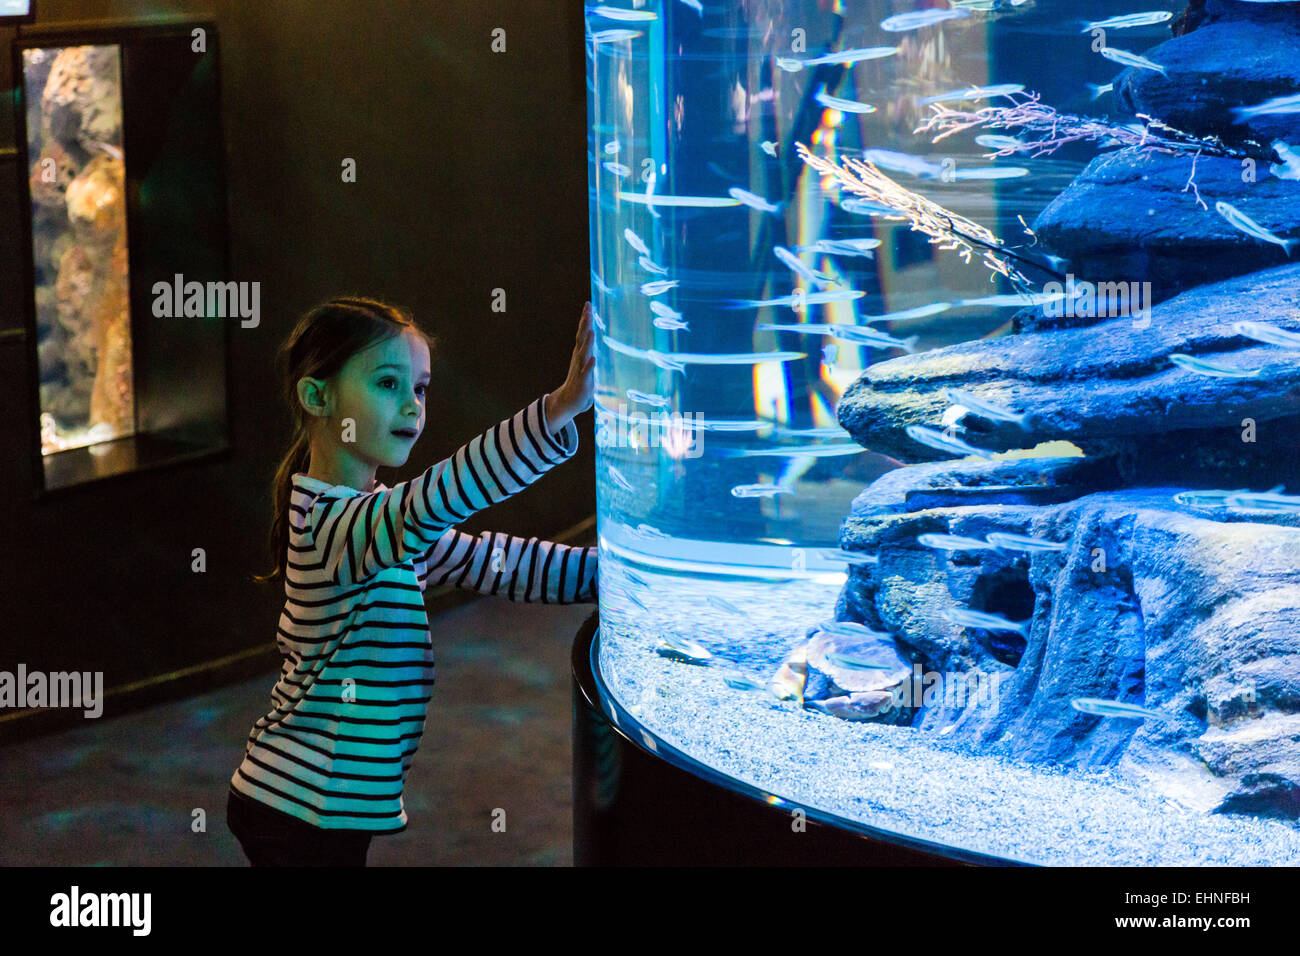 7 year-old girl watching fishes in an aquarium. Stock Photo